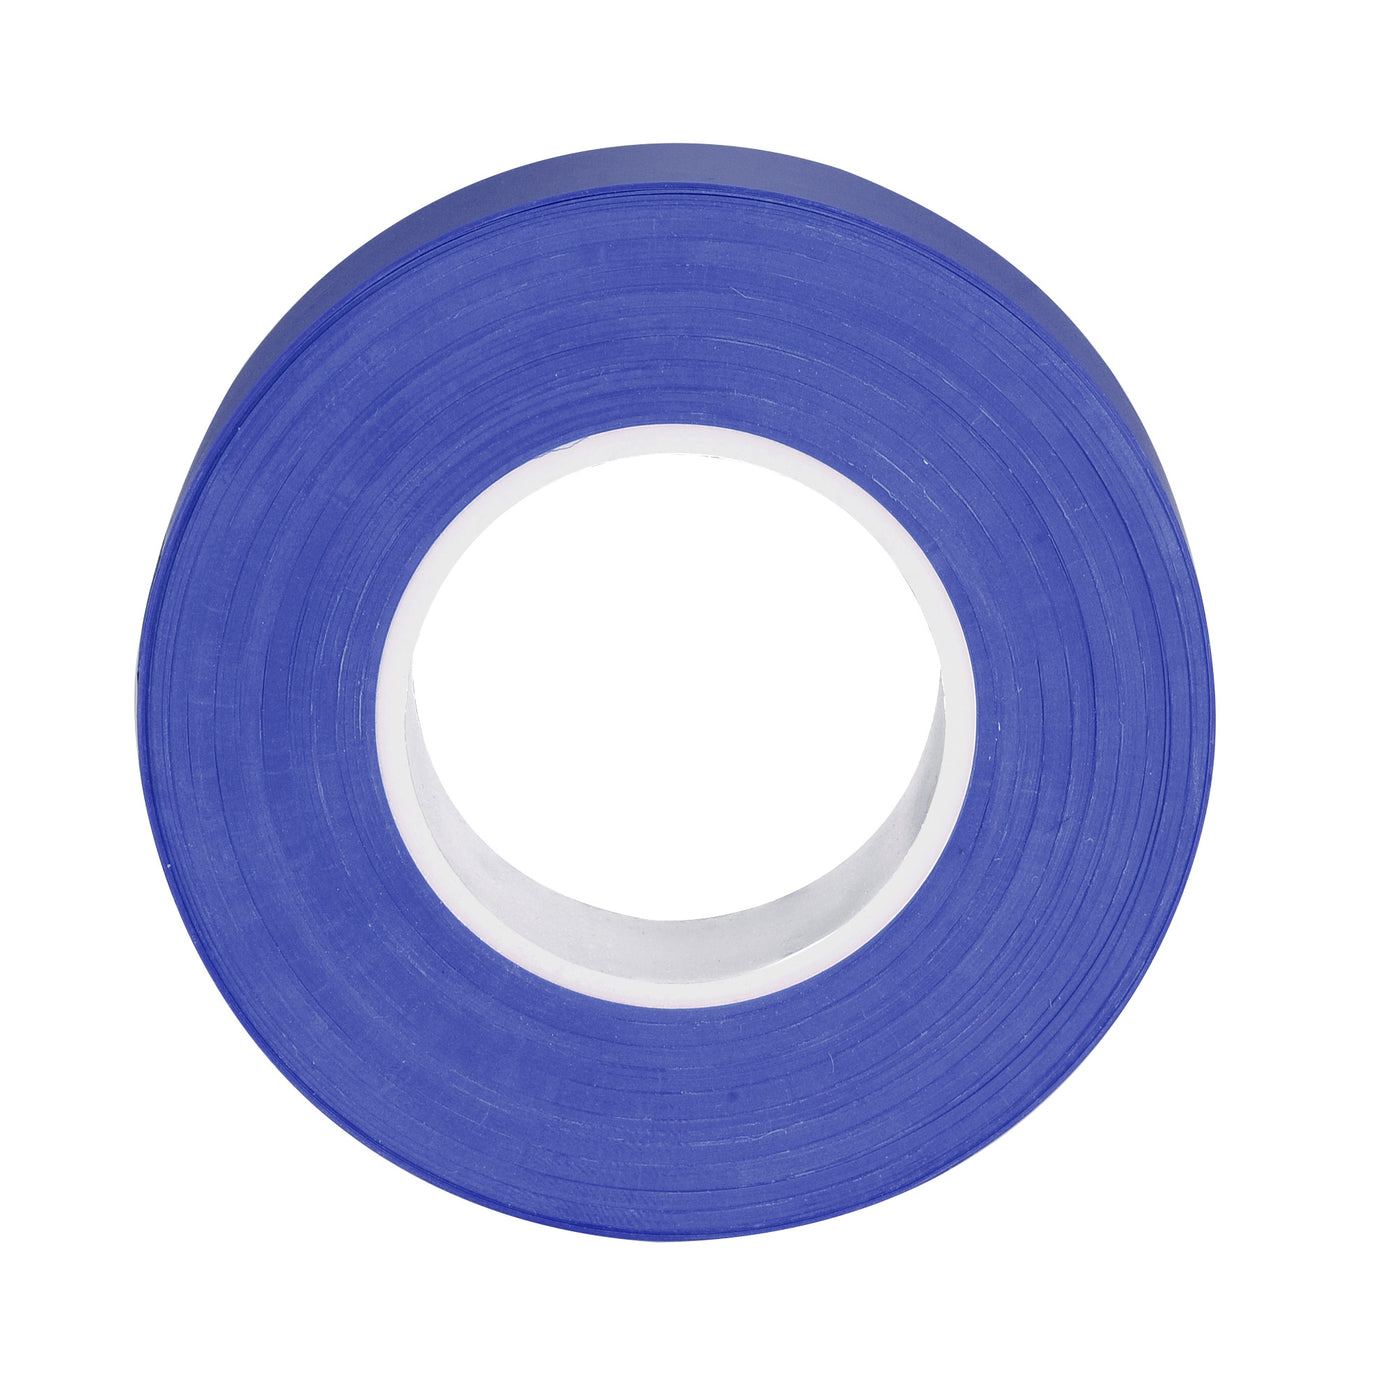 uxcell Uxcell PVC Flagging Tape 20mm x 20m/65.6ft Marking Tape Non-Adhesive Blue